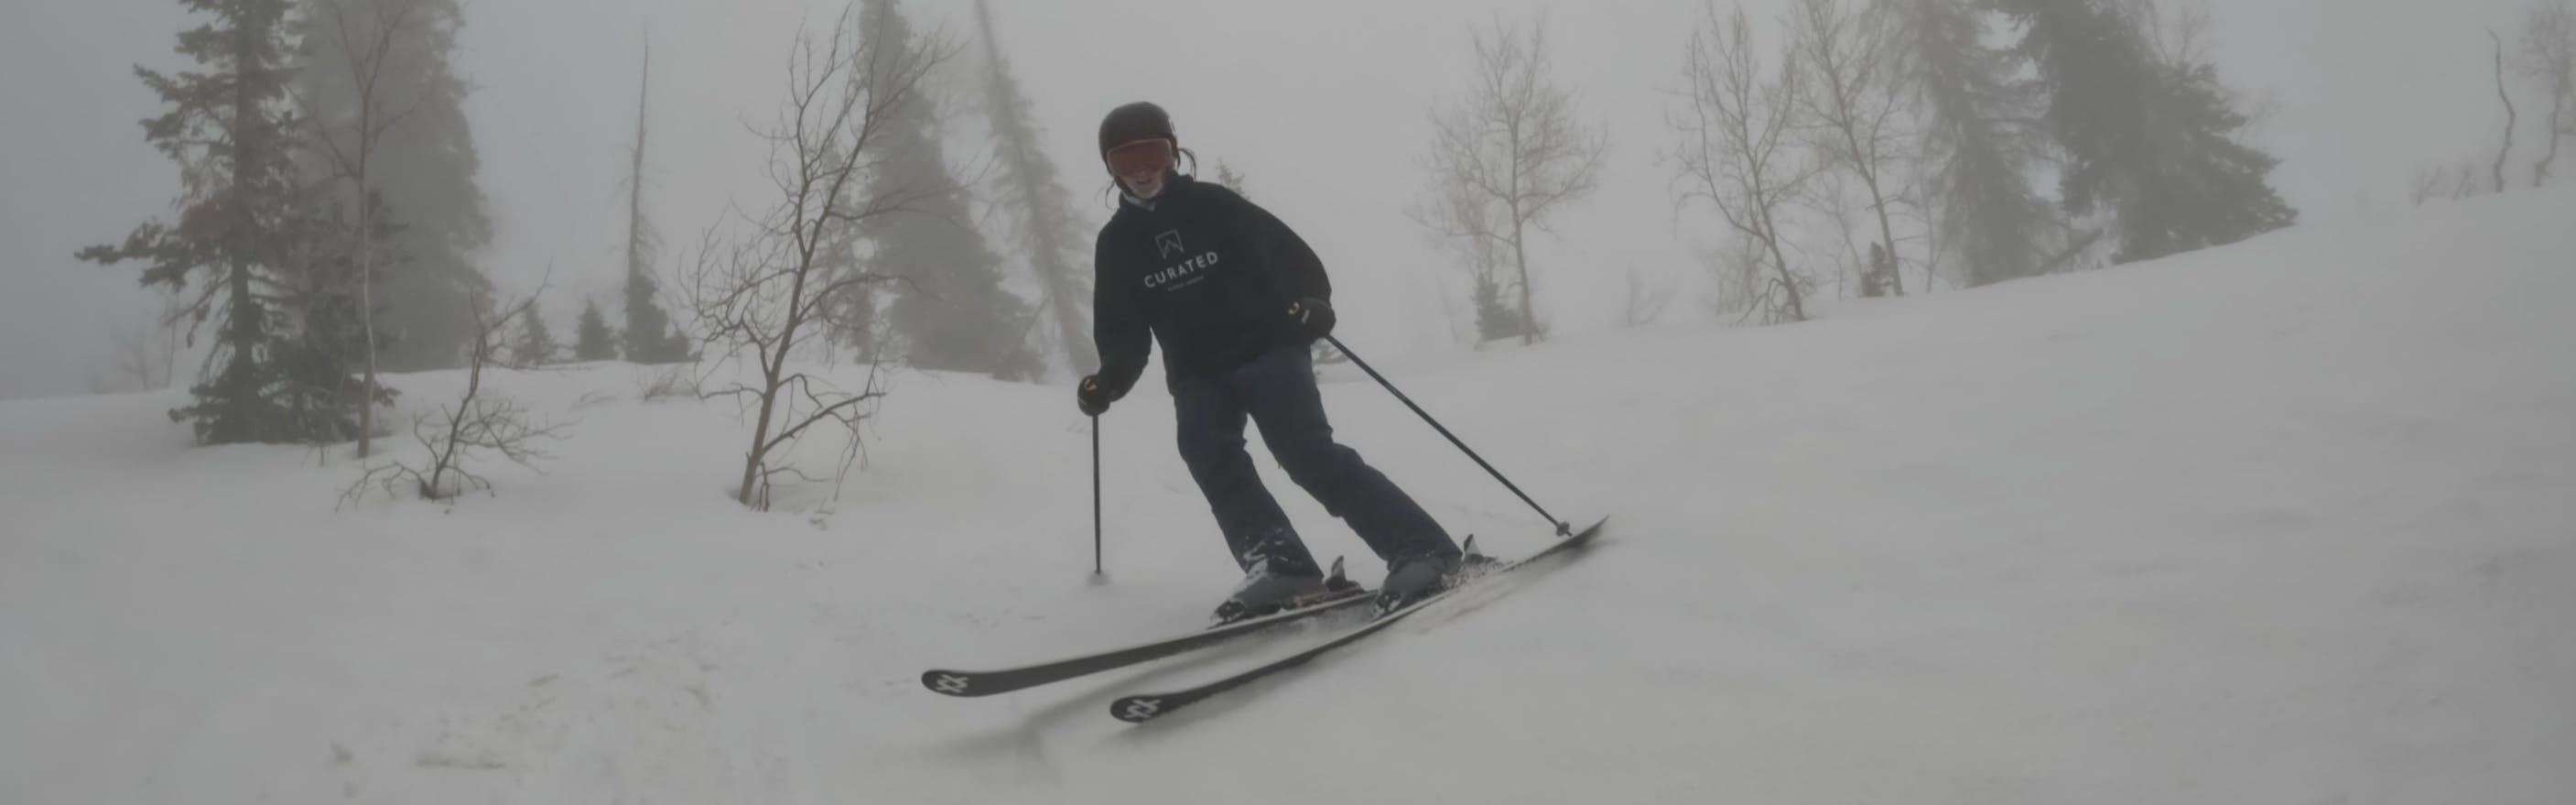 Curated Ski Expert Jessica Whittam on the 2023 Volkl Kenja 88 skis in foggy conditions